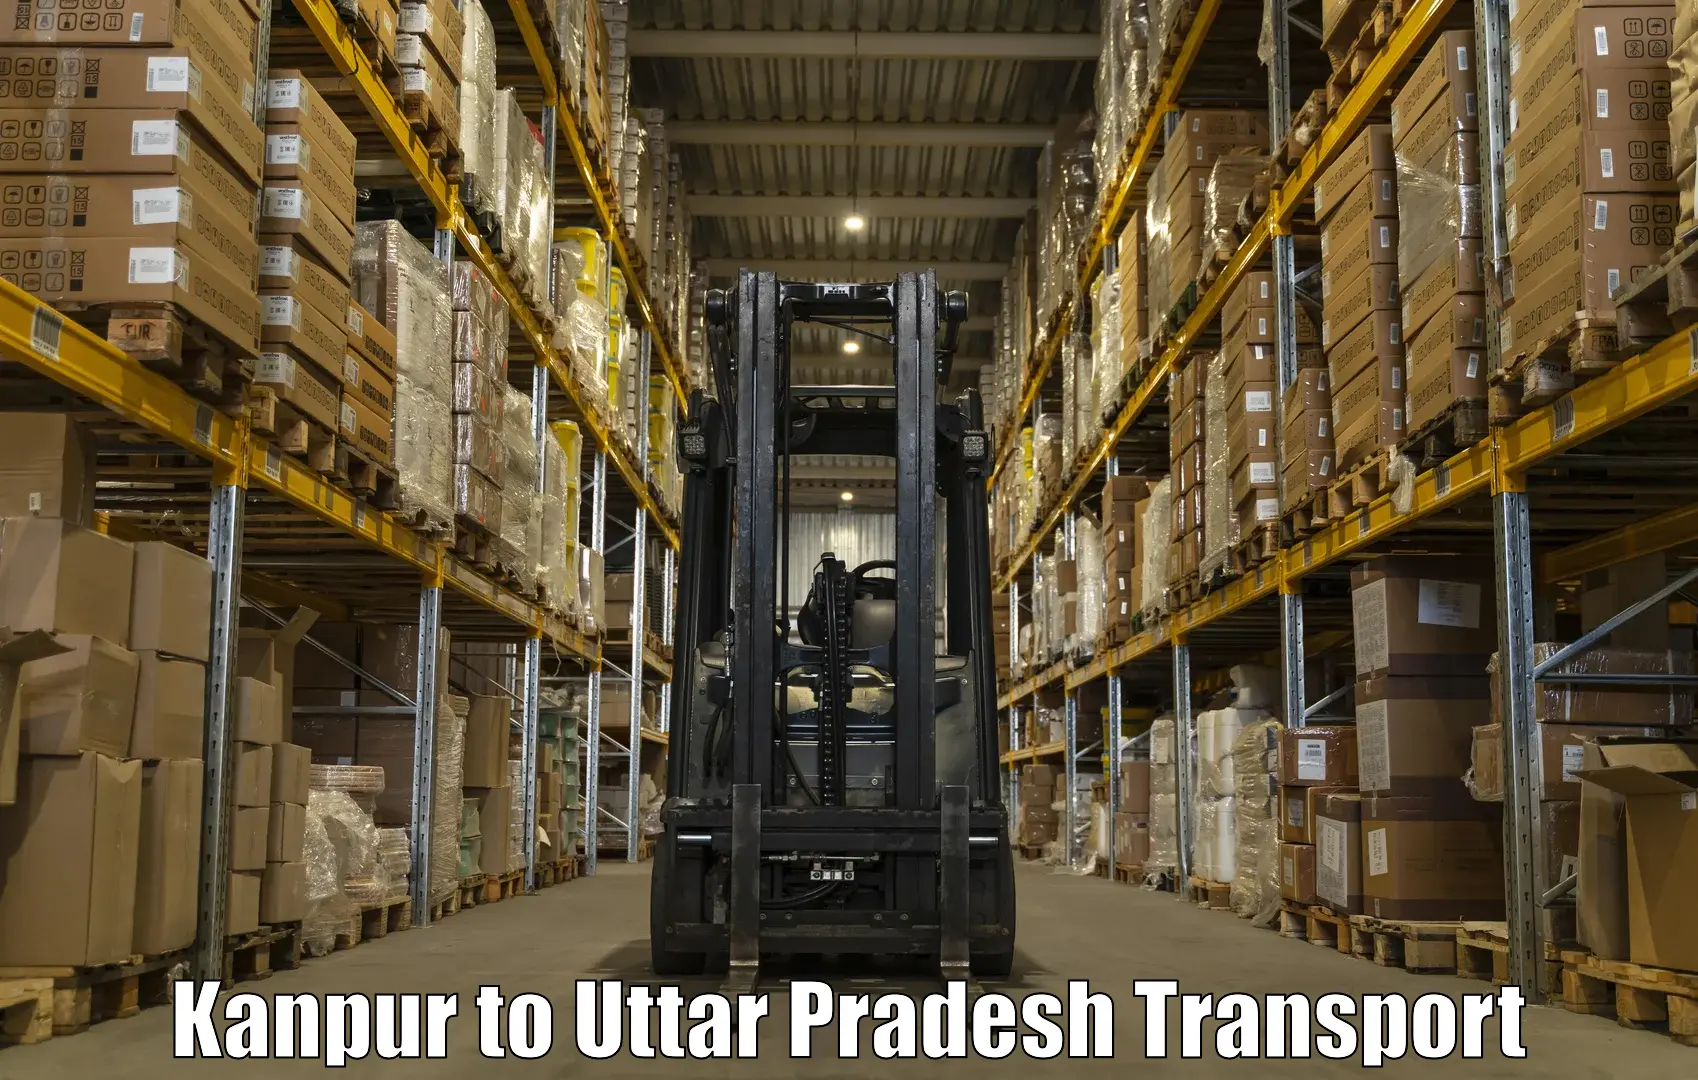 Daily parcel service transport Kanpur to Nichlaul